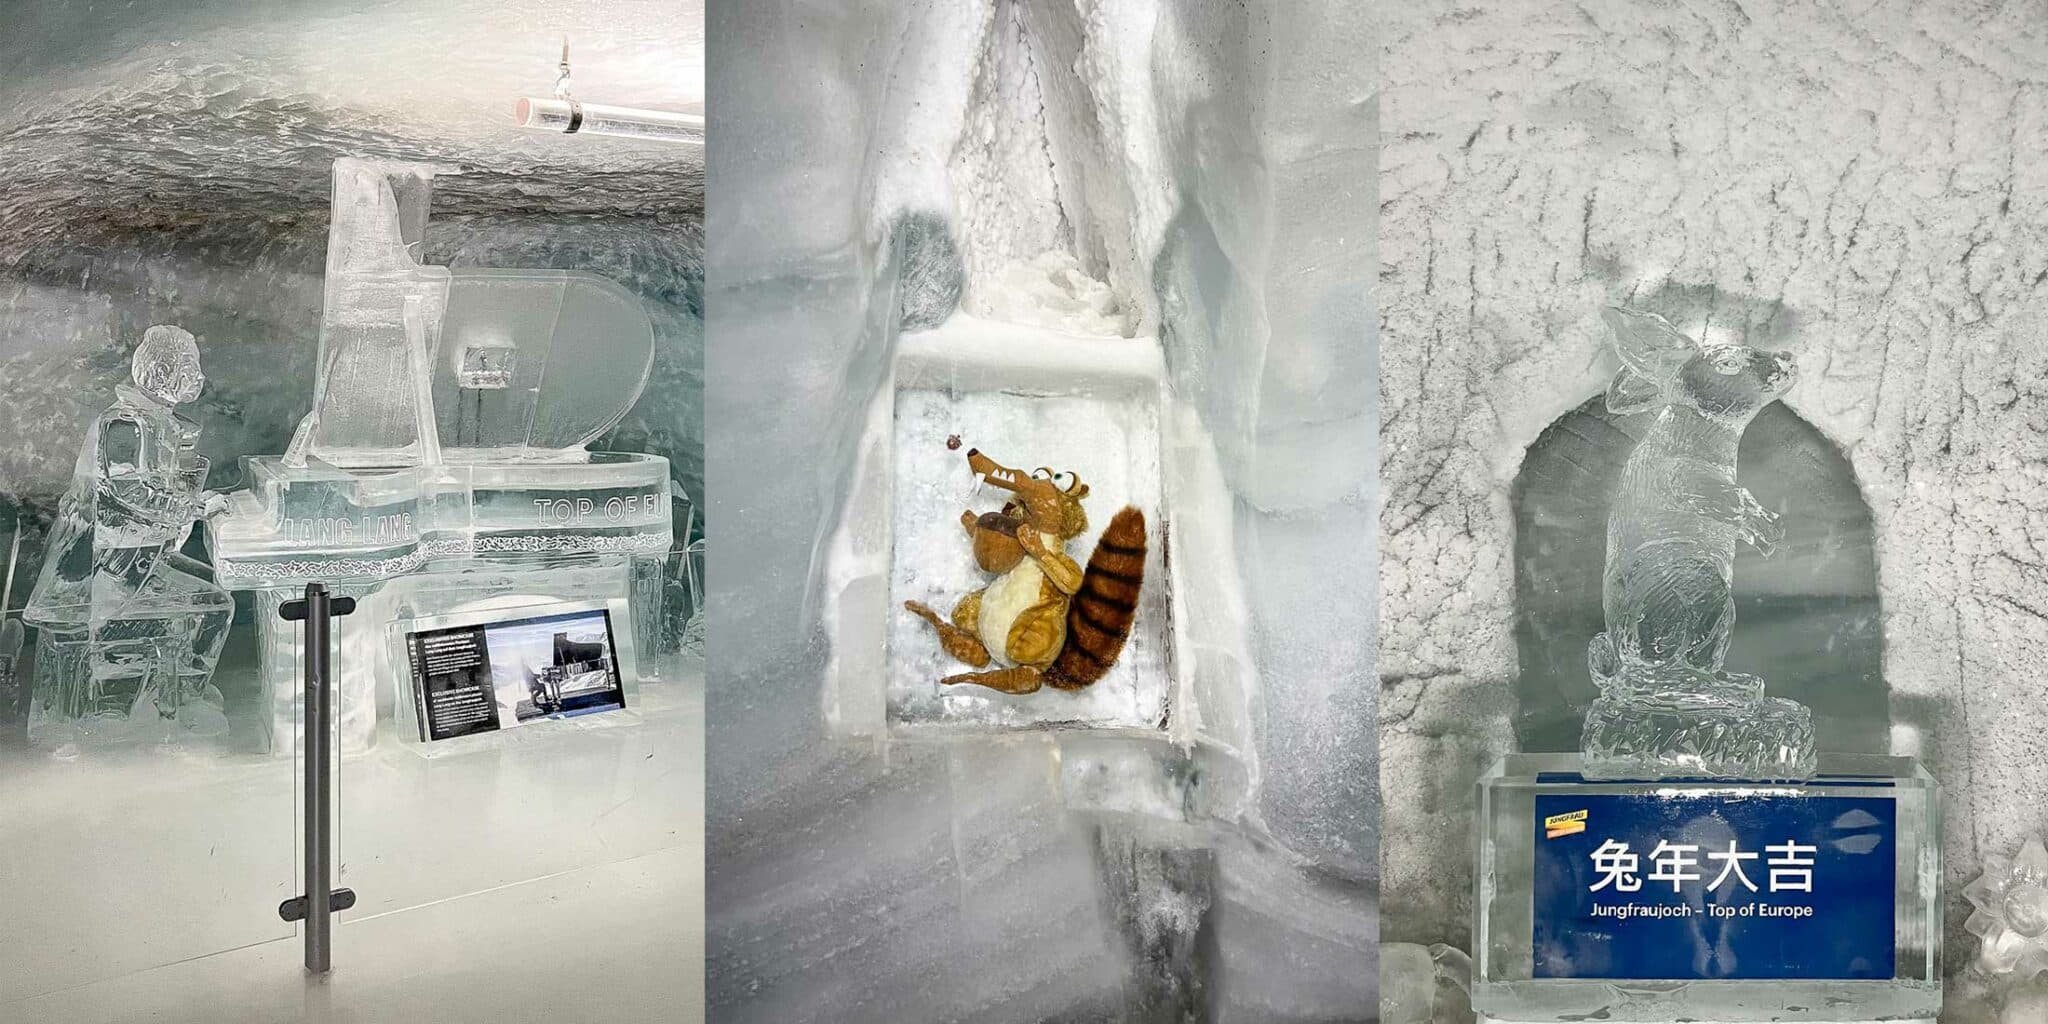 scenes from inside the Ice Palace at the Jungfraujoch